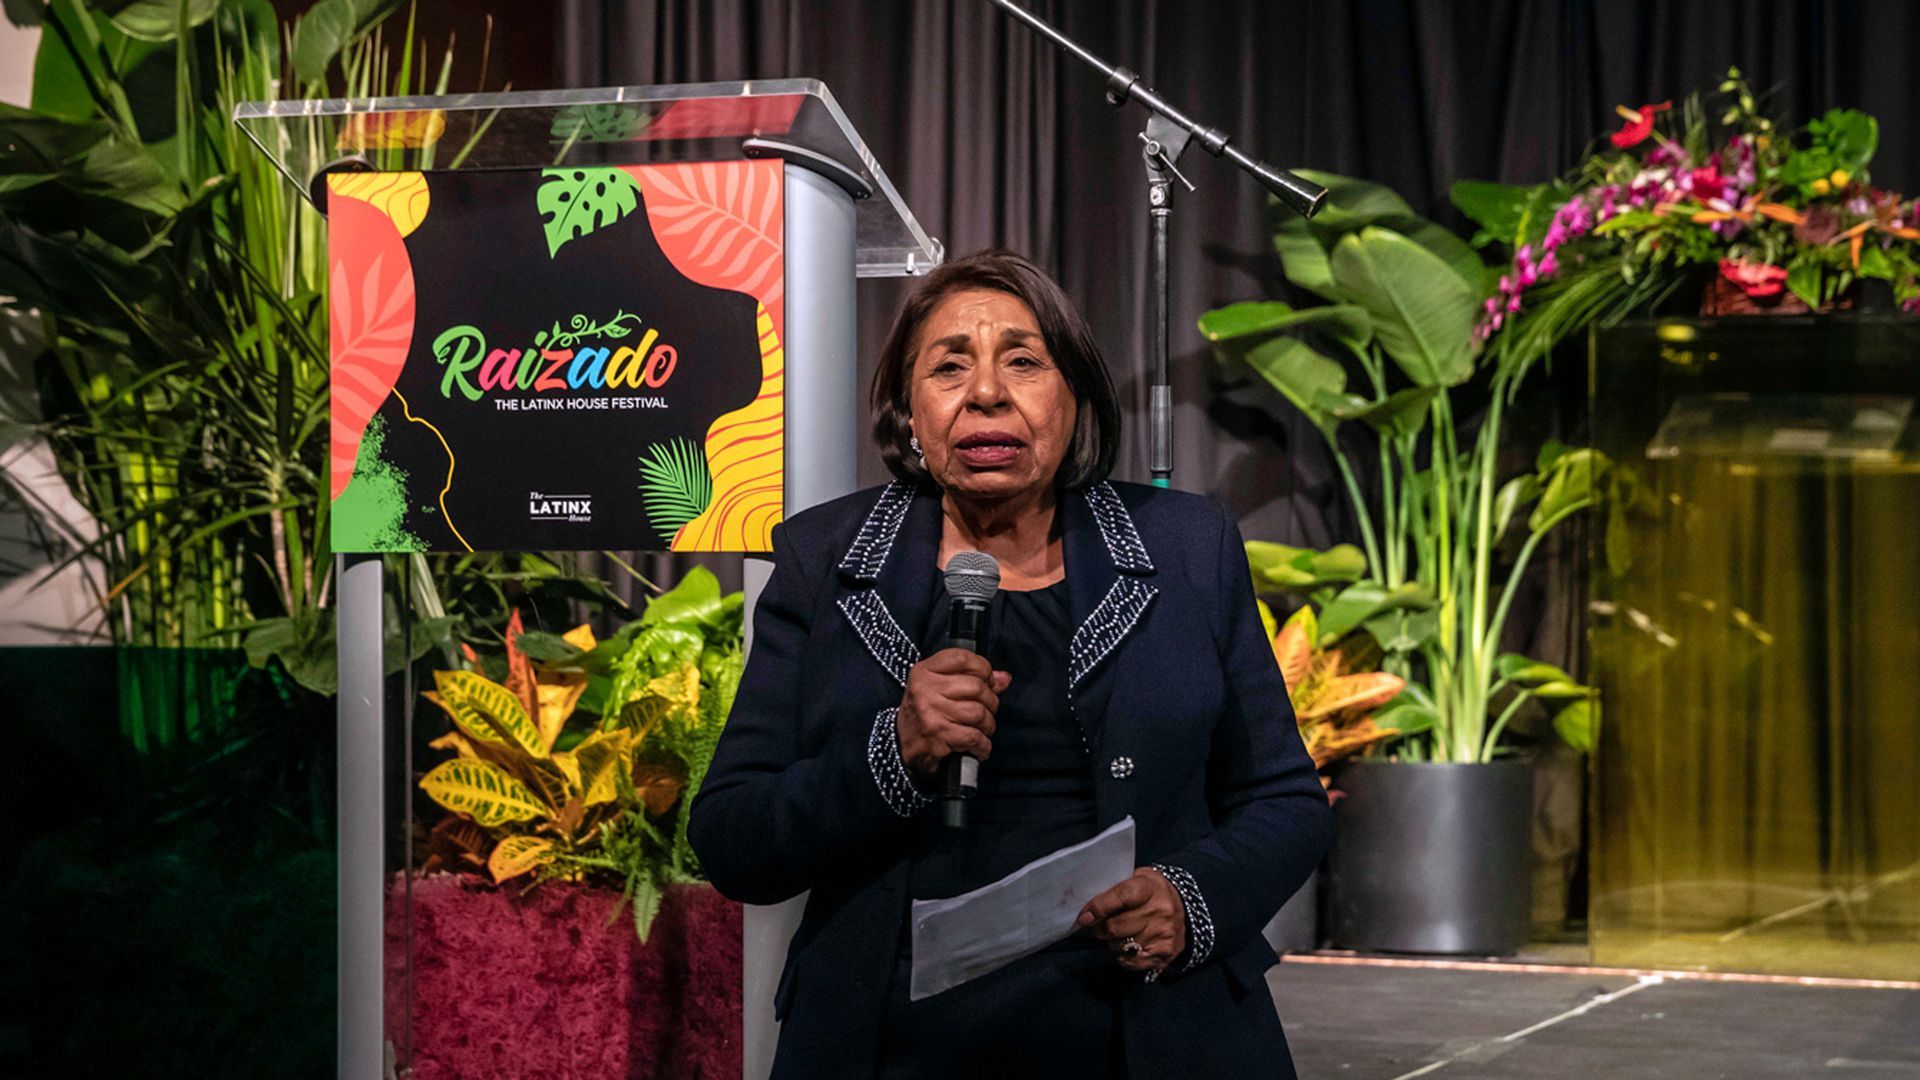 Sylvia Mendez speaks with a microphone after being honored at an event in Colorado